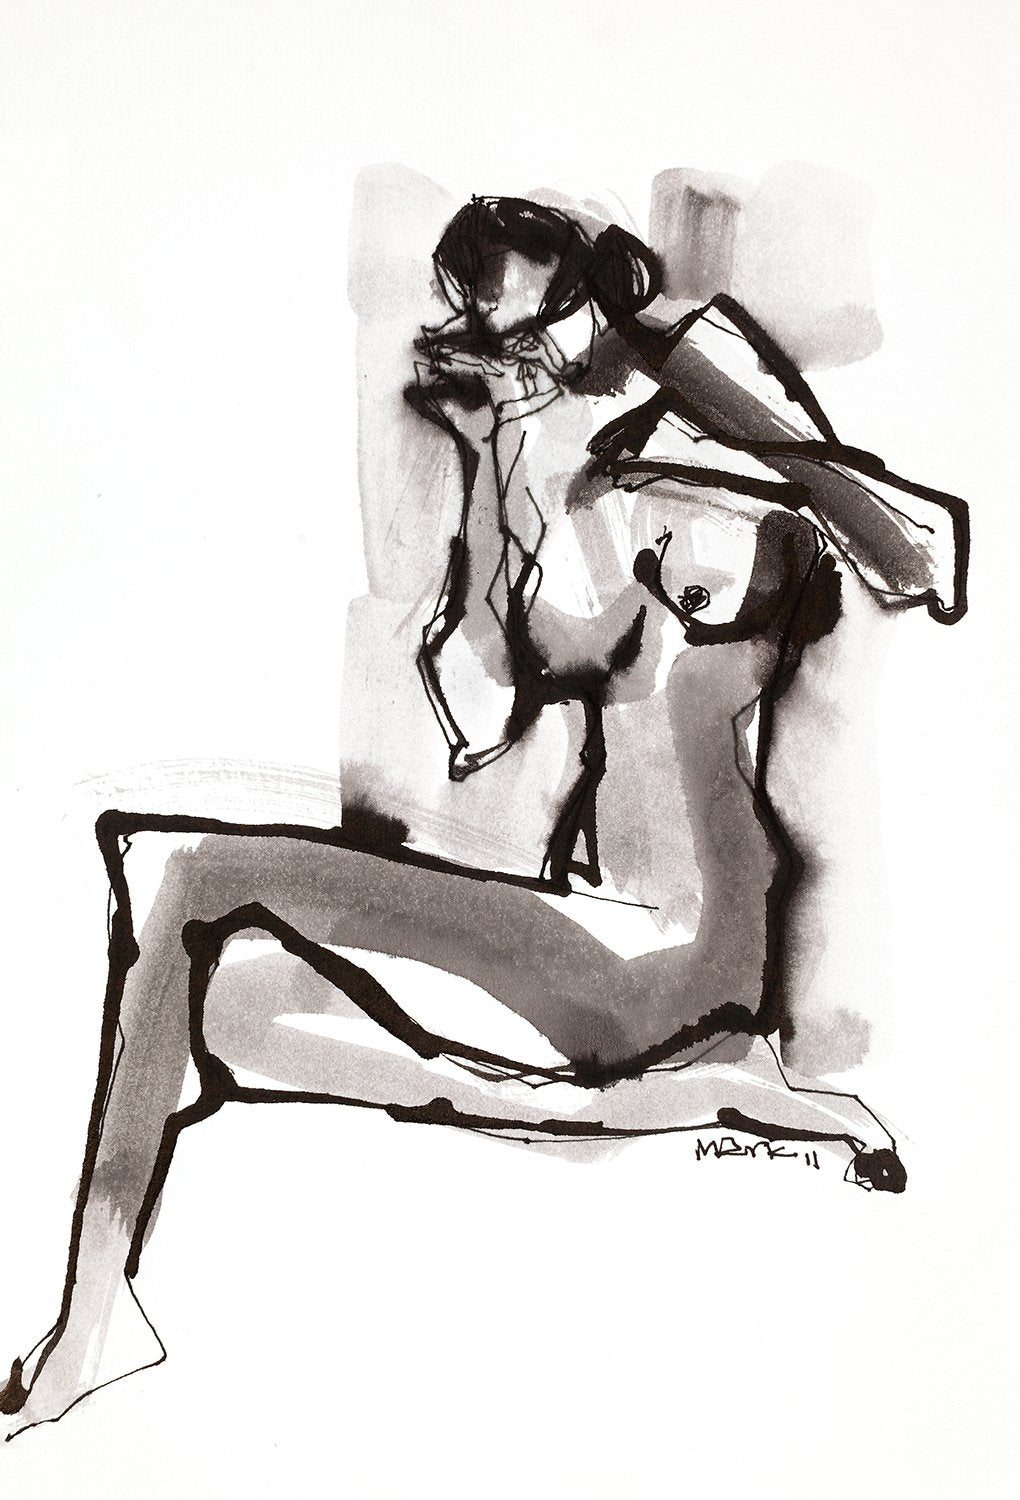 Nude 27|S. Mark Rathinaraj- Pen and Ink on Paper, , 11.5 x 8.25 inches